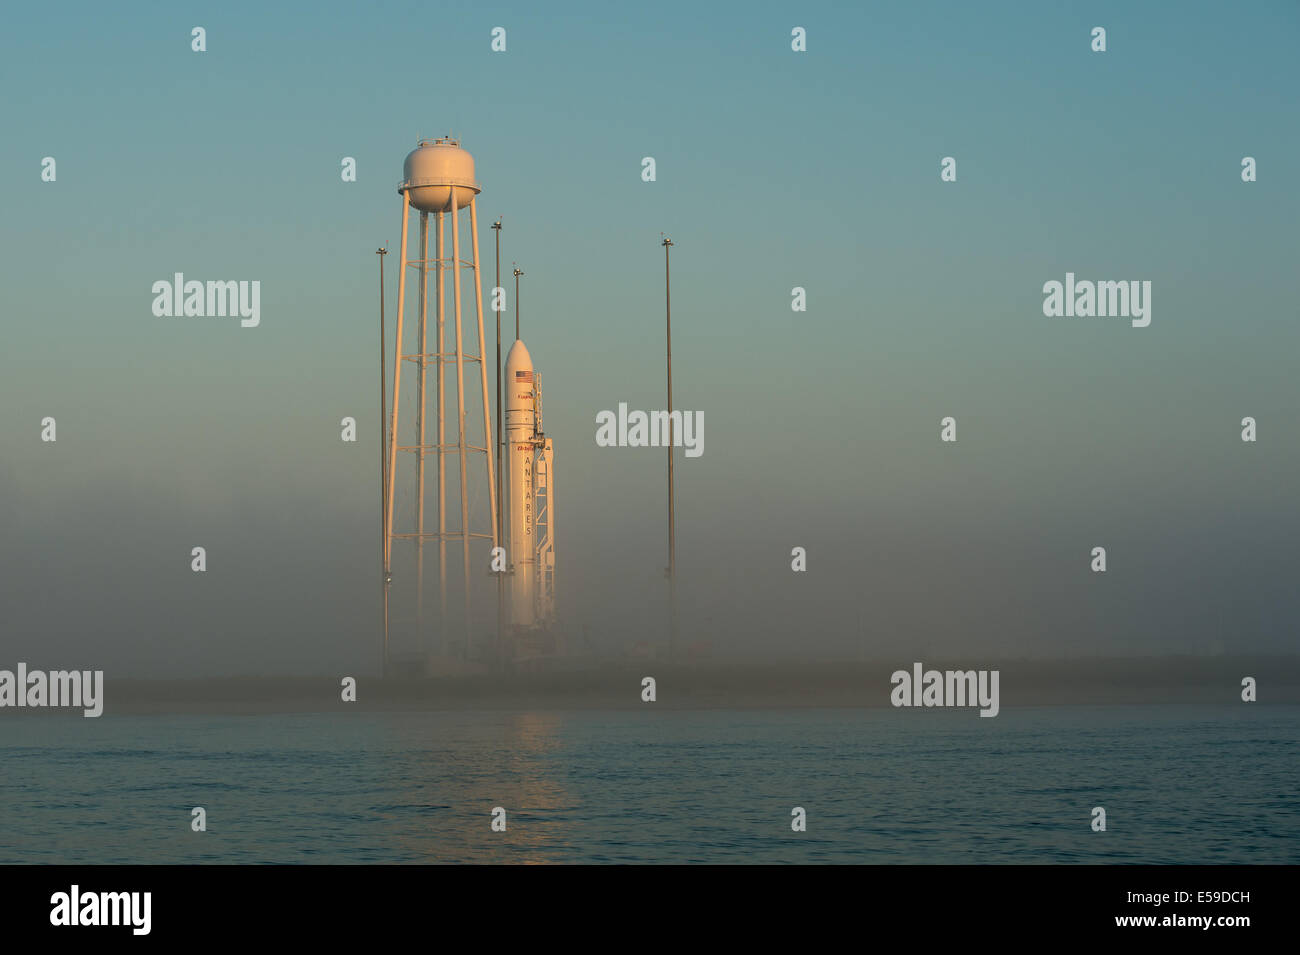 The Orbital Sciences Corporation Antares rocket, with the Cygnus spacecraft onboard, is seen during sunrise, Saturday, July 12, 2014, at launch Pad-0A of NASA's Wallops Flight Facility in Virginia. The Antares will launch with the Cygnus spacecraft filled Stock Photo